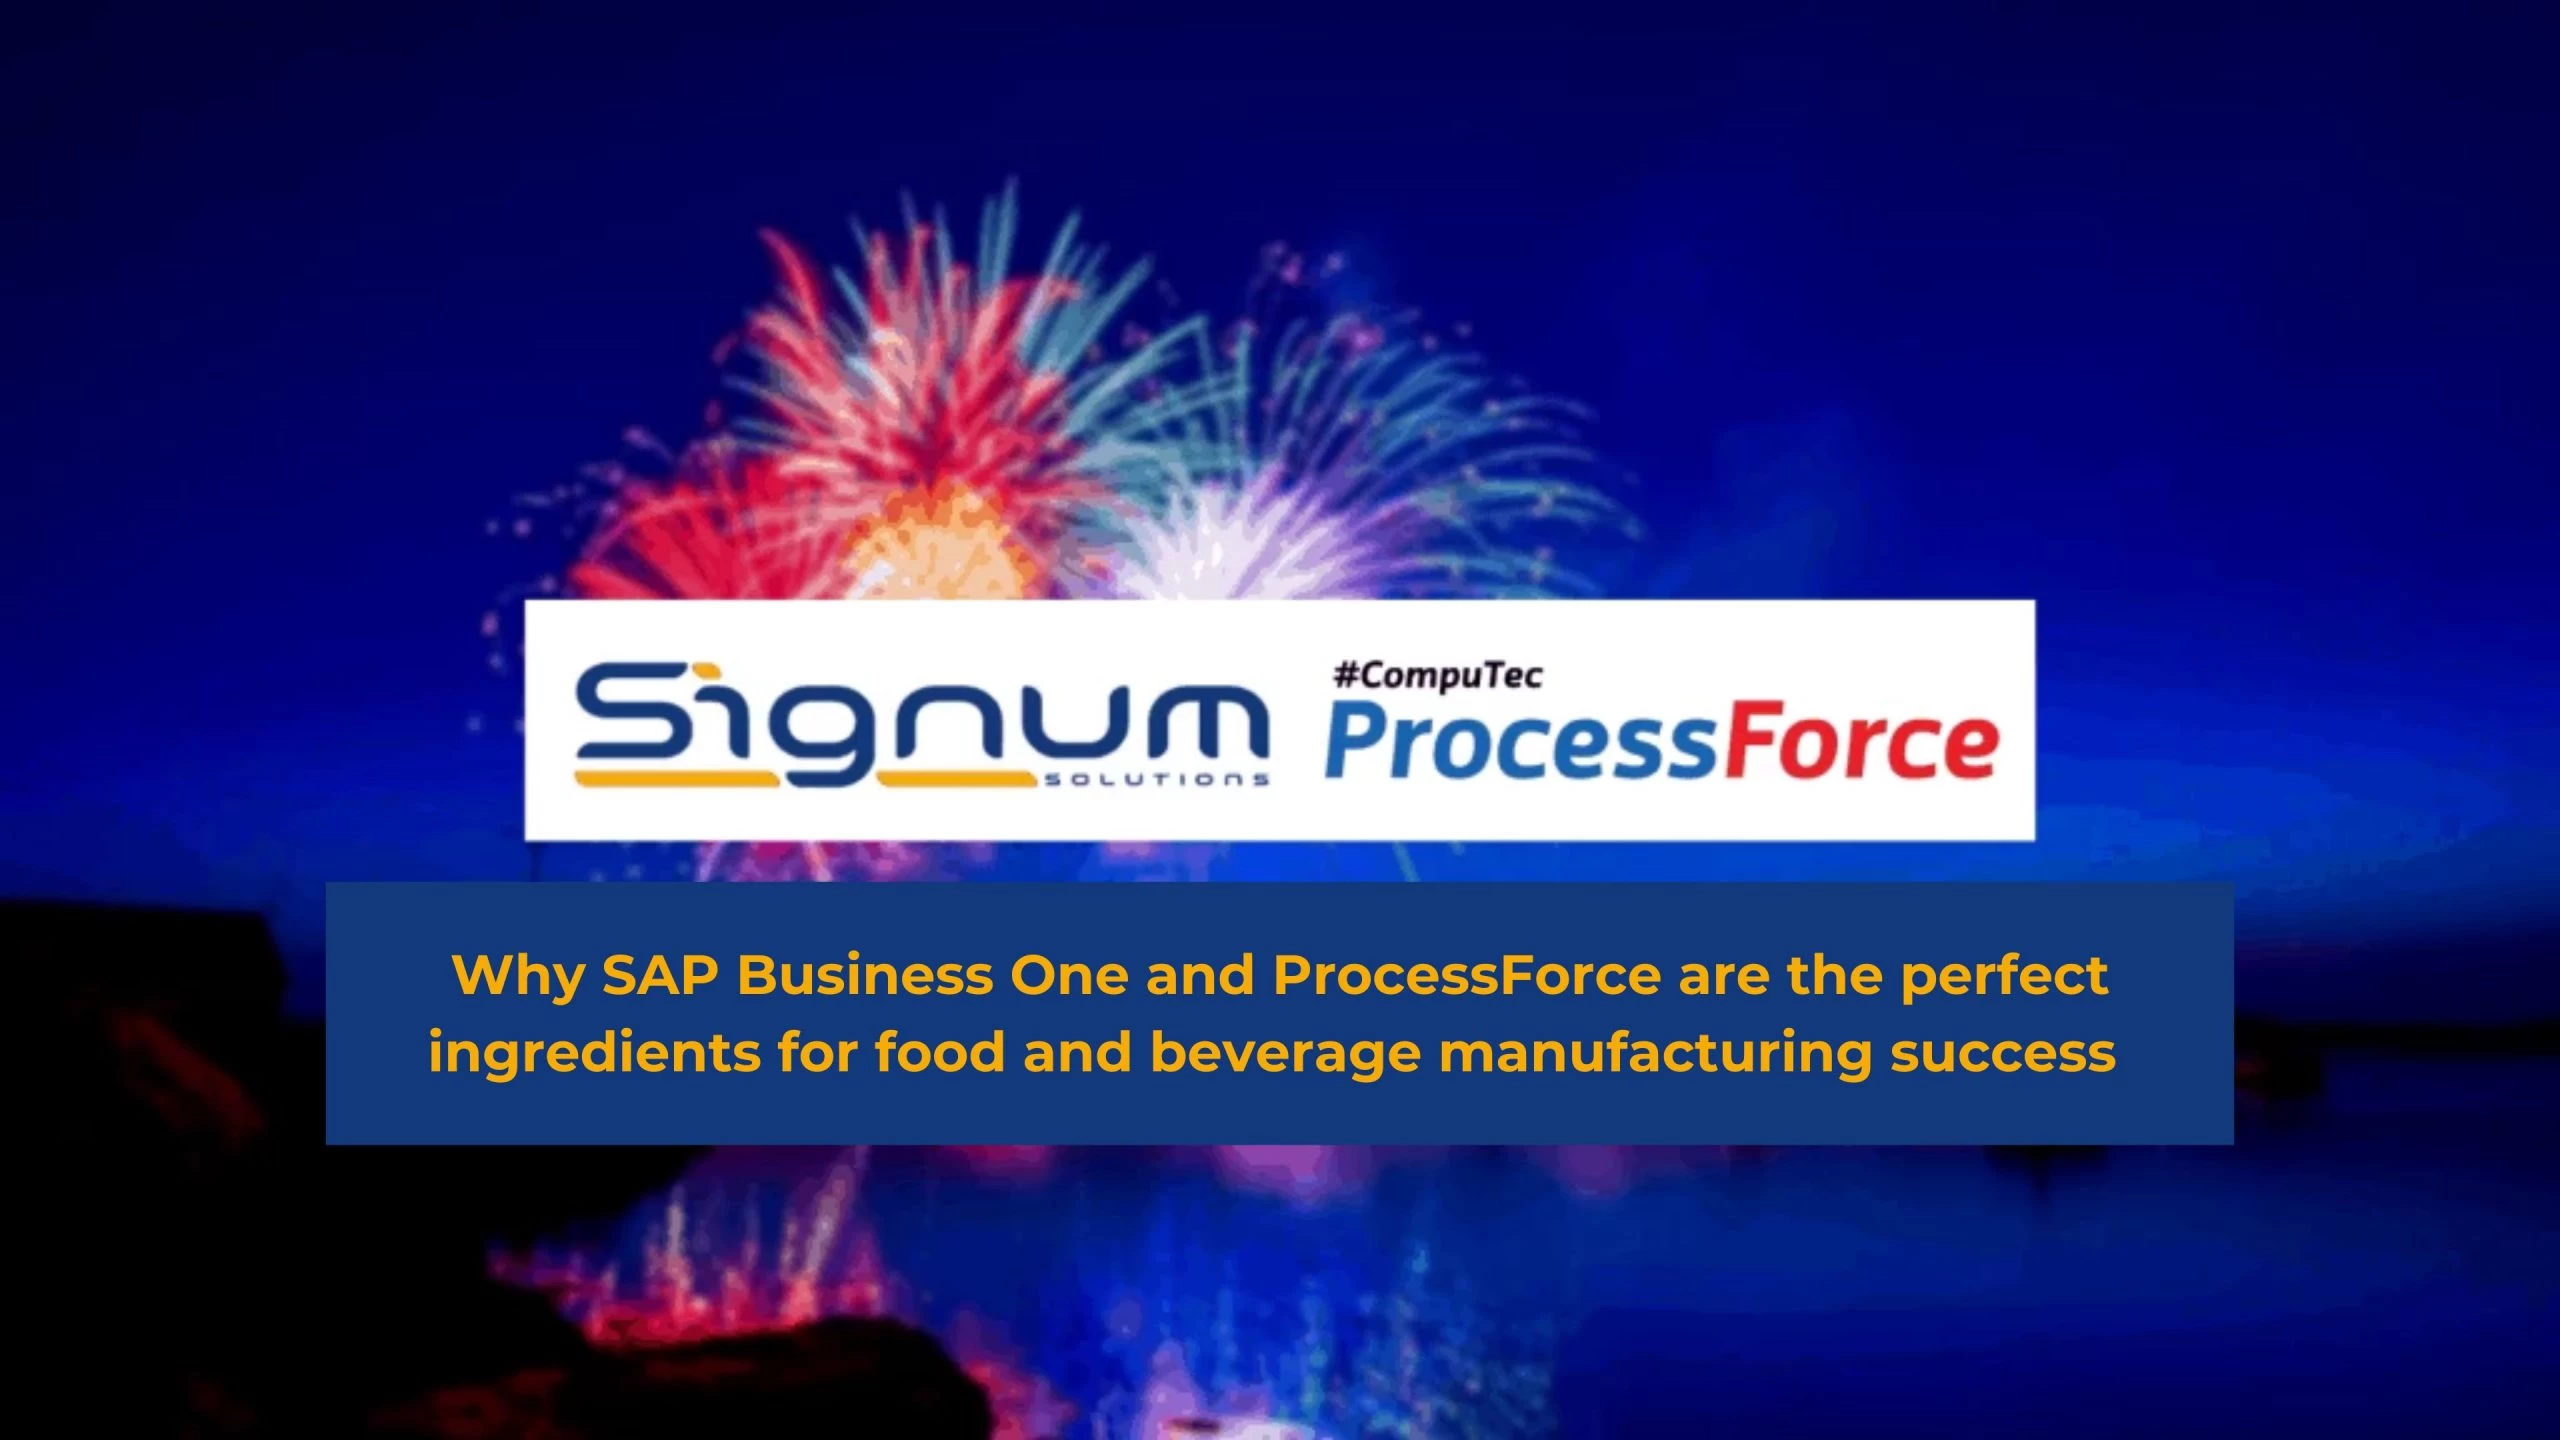 Why SAP Business One and ProcessForce are the perfect ingredients for food and beverage manufacturing success